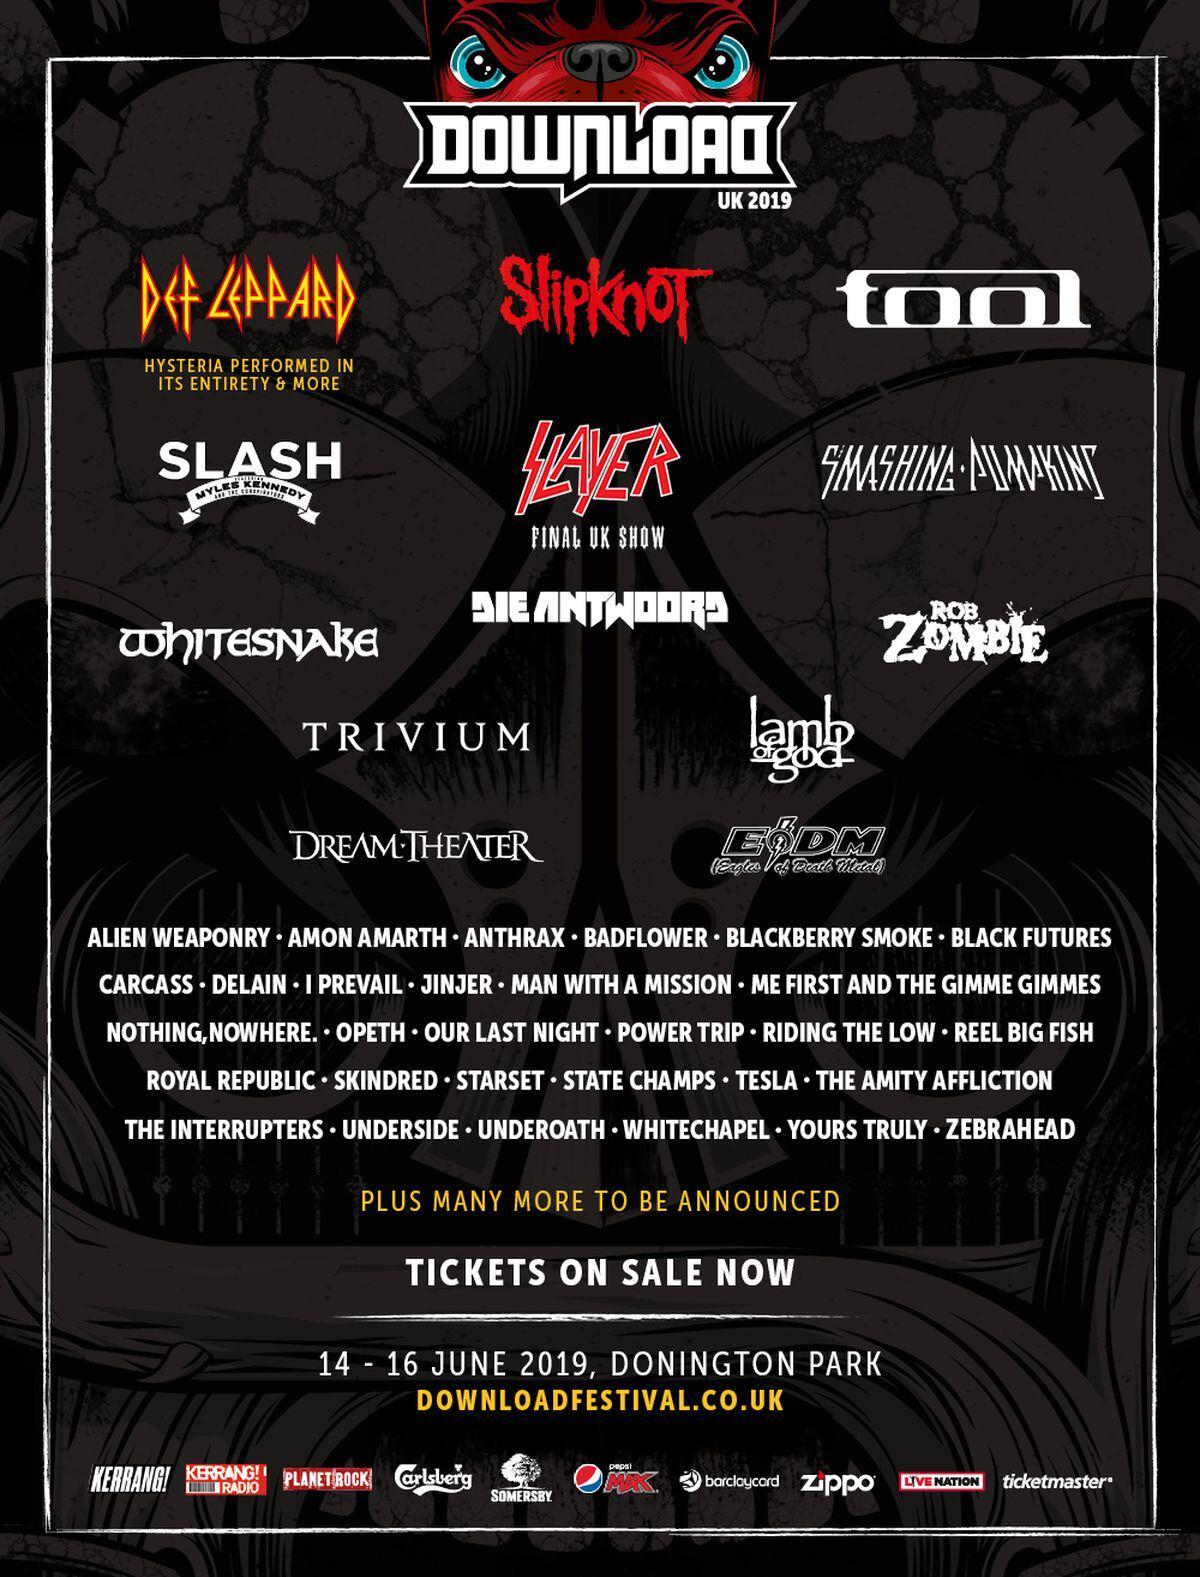 Download Festival 19 Smashing Pumpkins Slayer Lamb Of God And More Announced Express Star